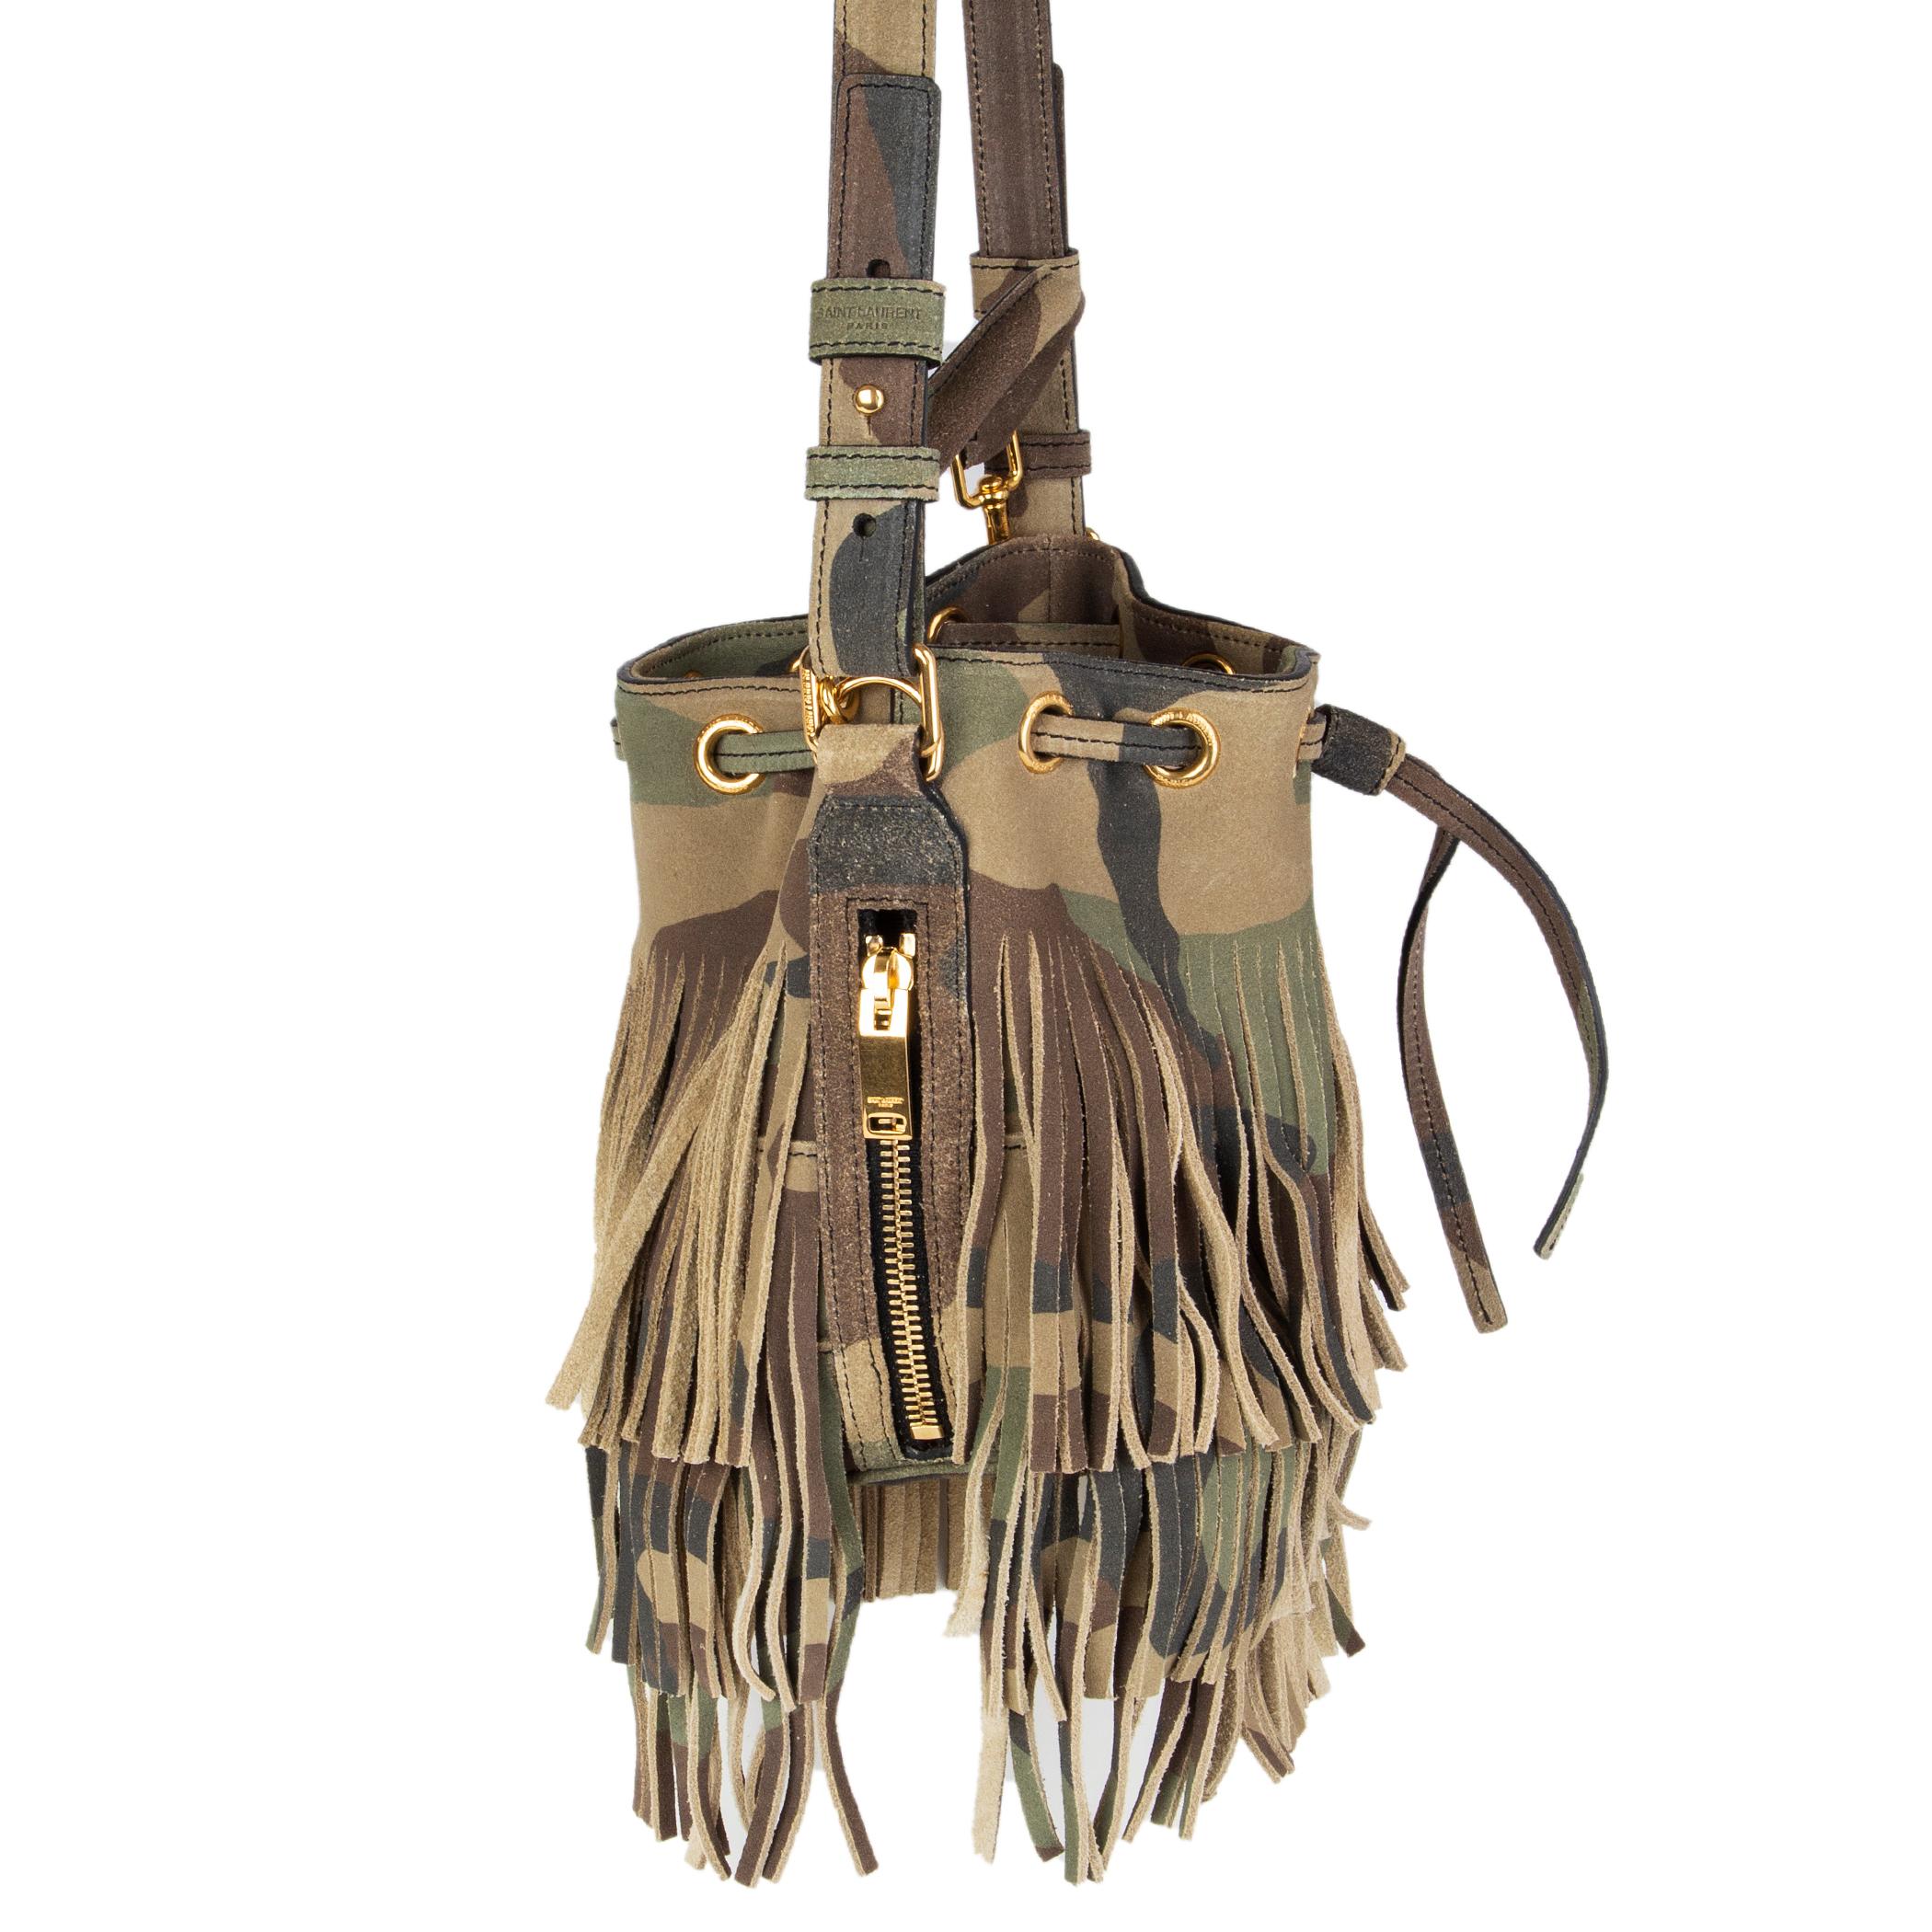 Saint Laurent 'Emmanuelle' fringed camouflage printed suede bucket bag featuring gold-tone hardware. Has a detachable top-handle and shoulder-strap and a small zip pocket on the side. Lined in black suede. Has been carried and is in excellent